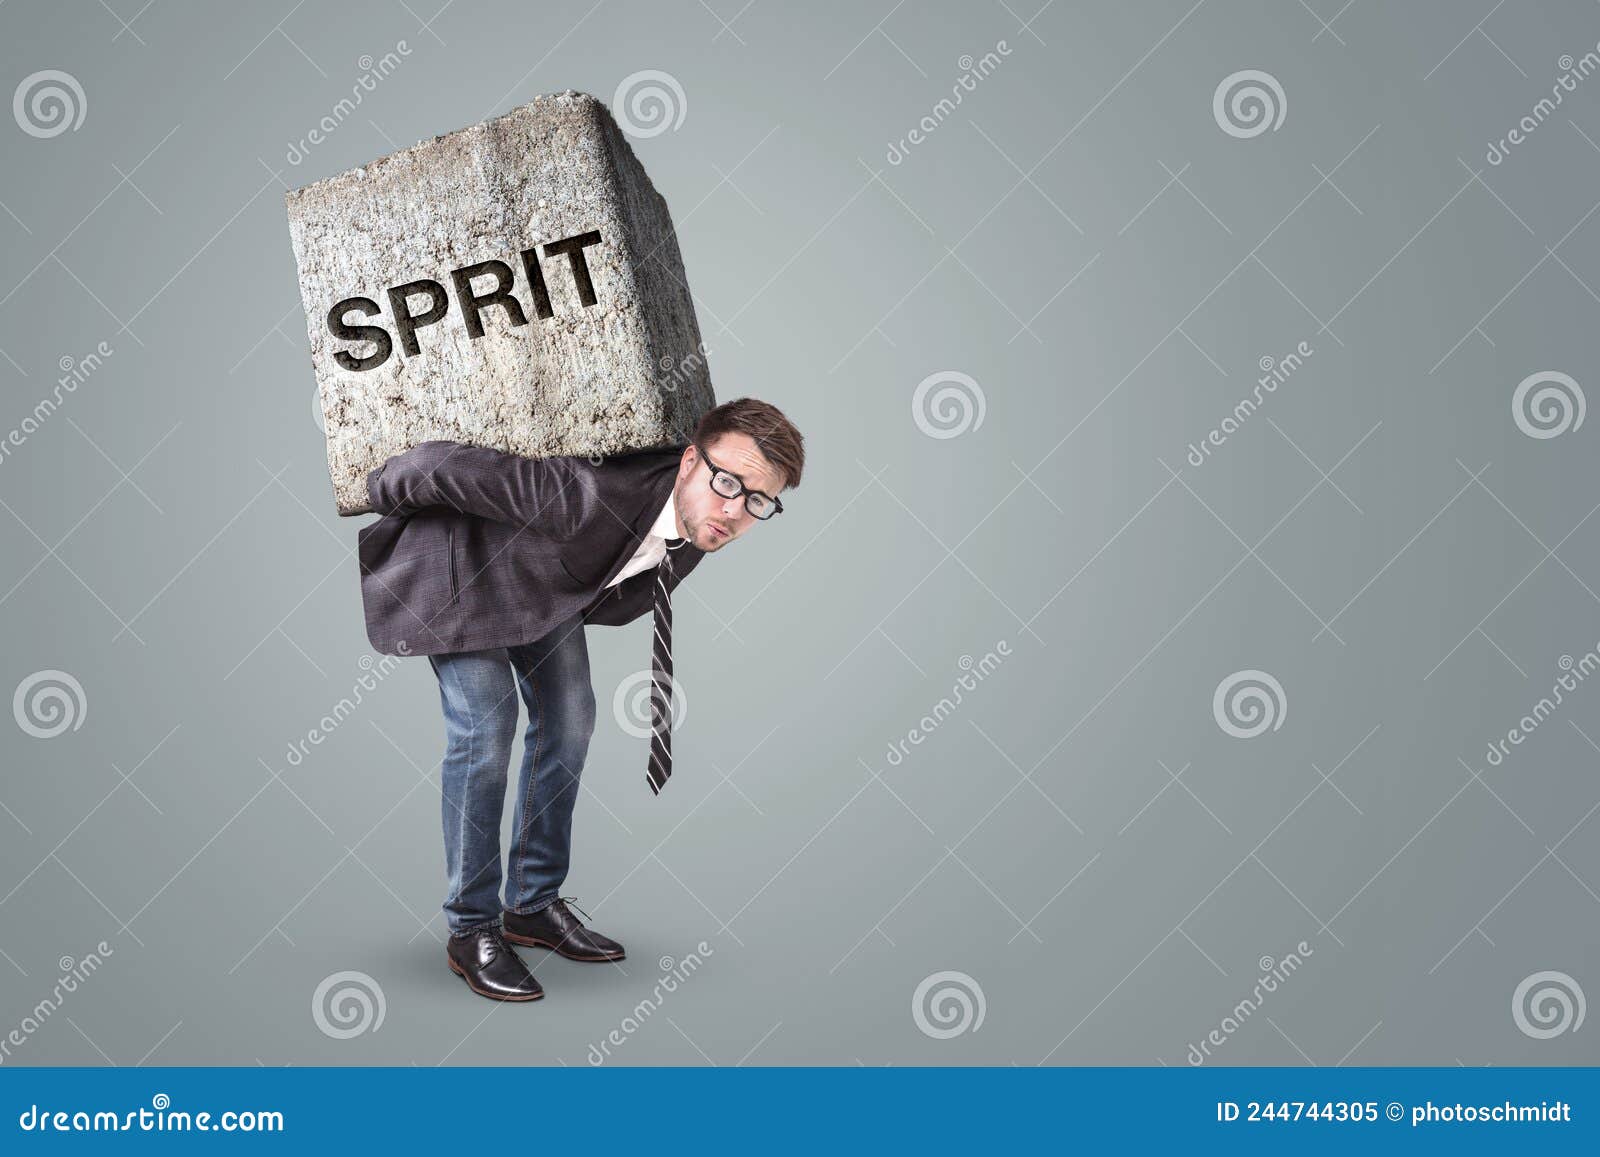 businessman burdened by a heavy stone with the german word sprit on it